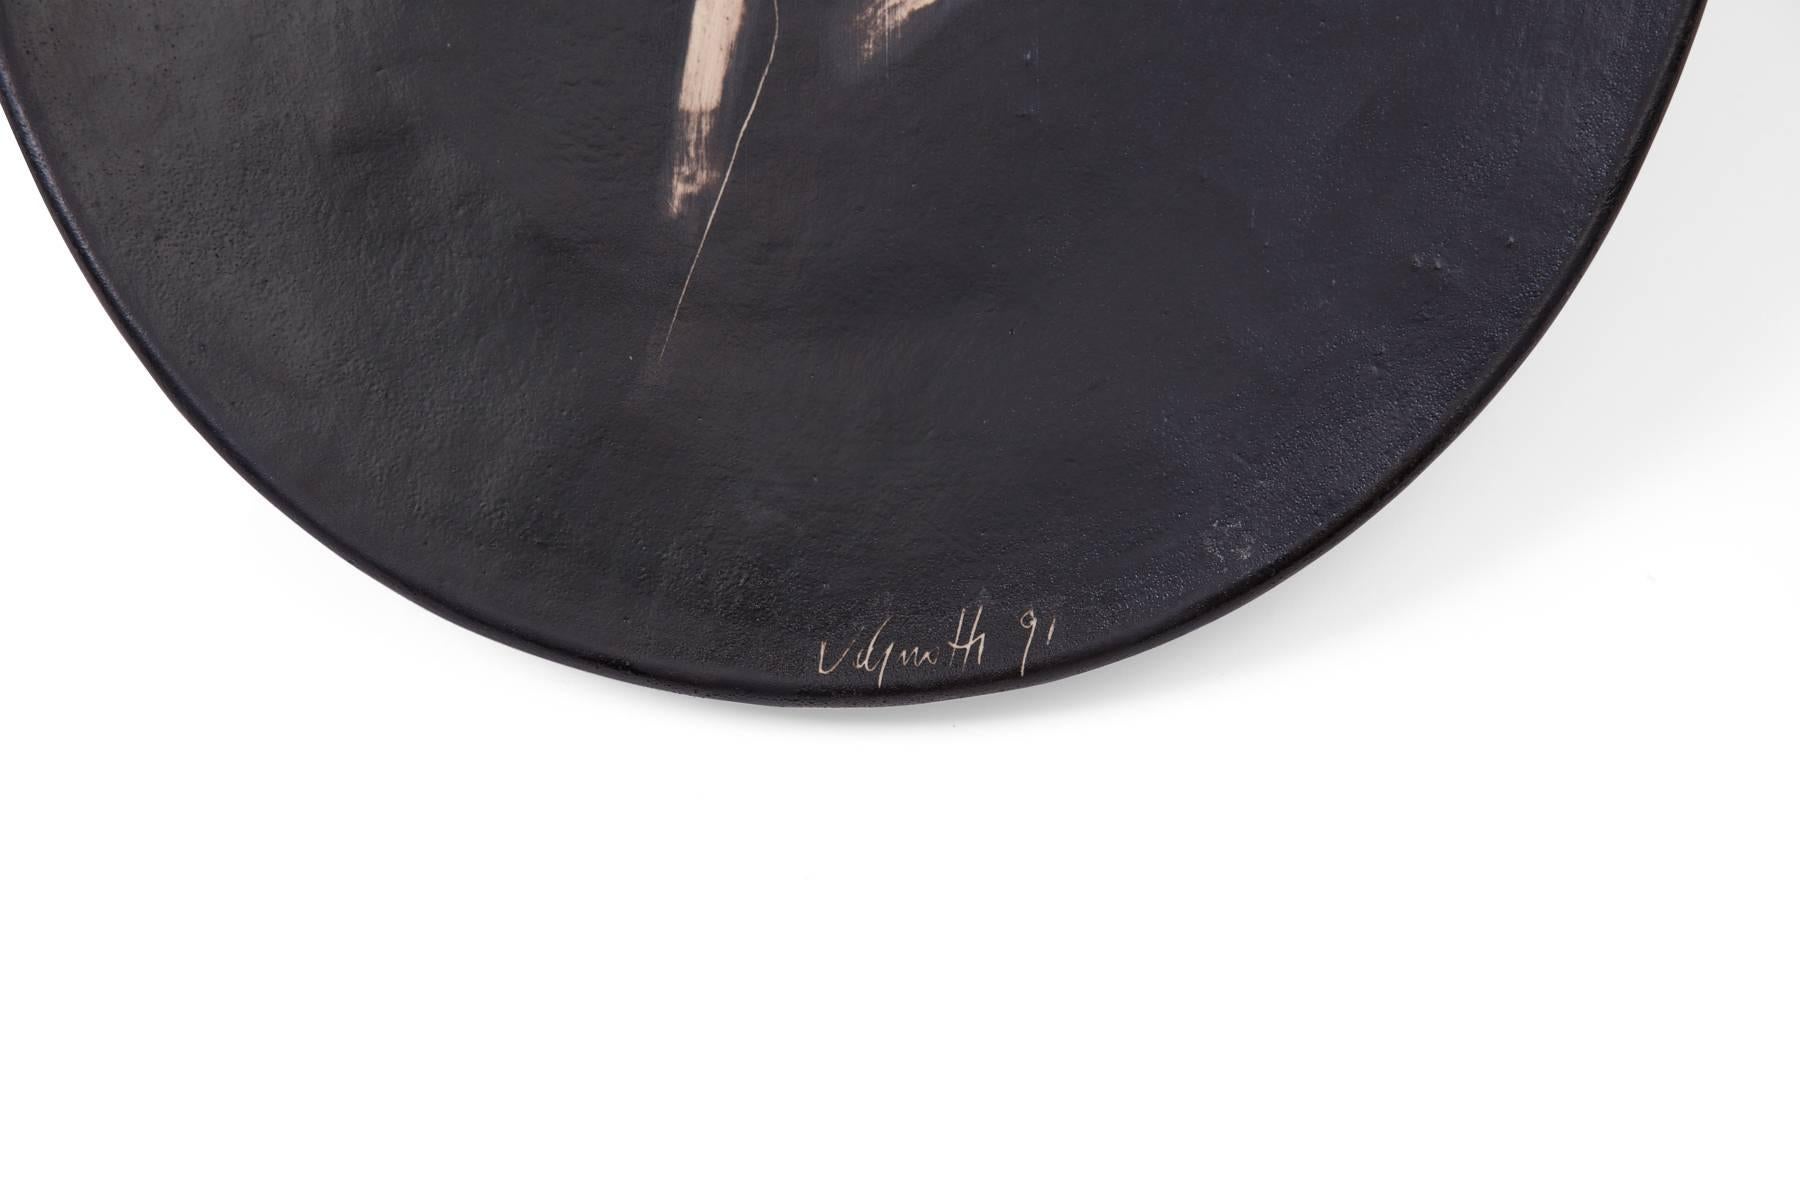 Agnese Udinotti ceramic charger, circa 1991. This example was purchased directly from the artist and has a black painted background with Udinotti's iconic figures in the center. The charger can also be hung on the wall as a sculptural piece. Signed